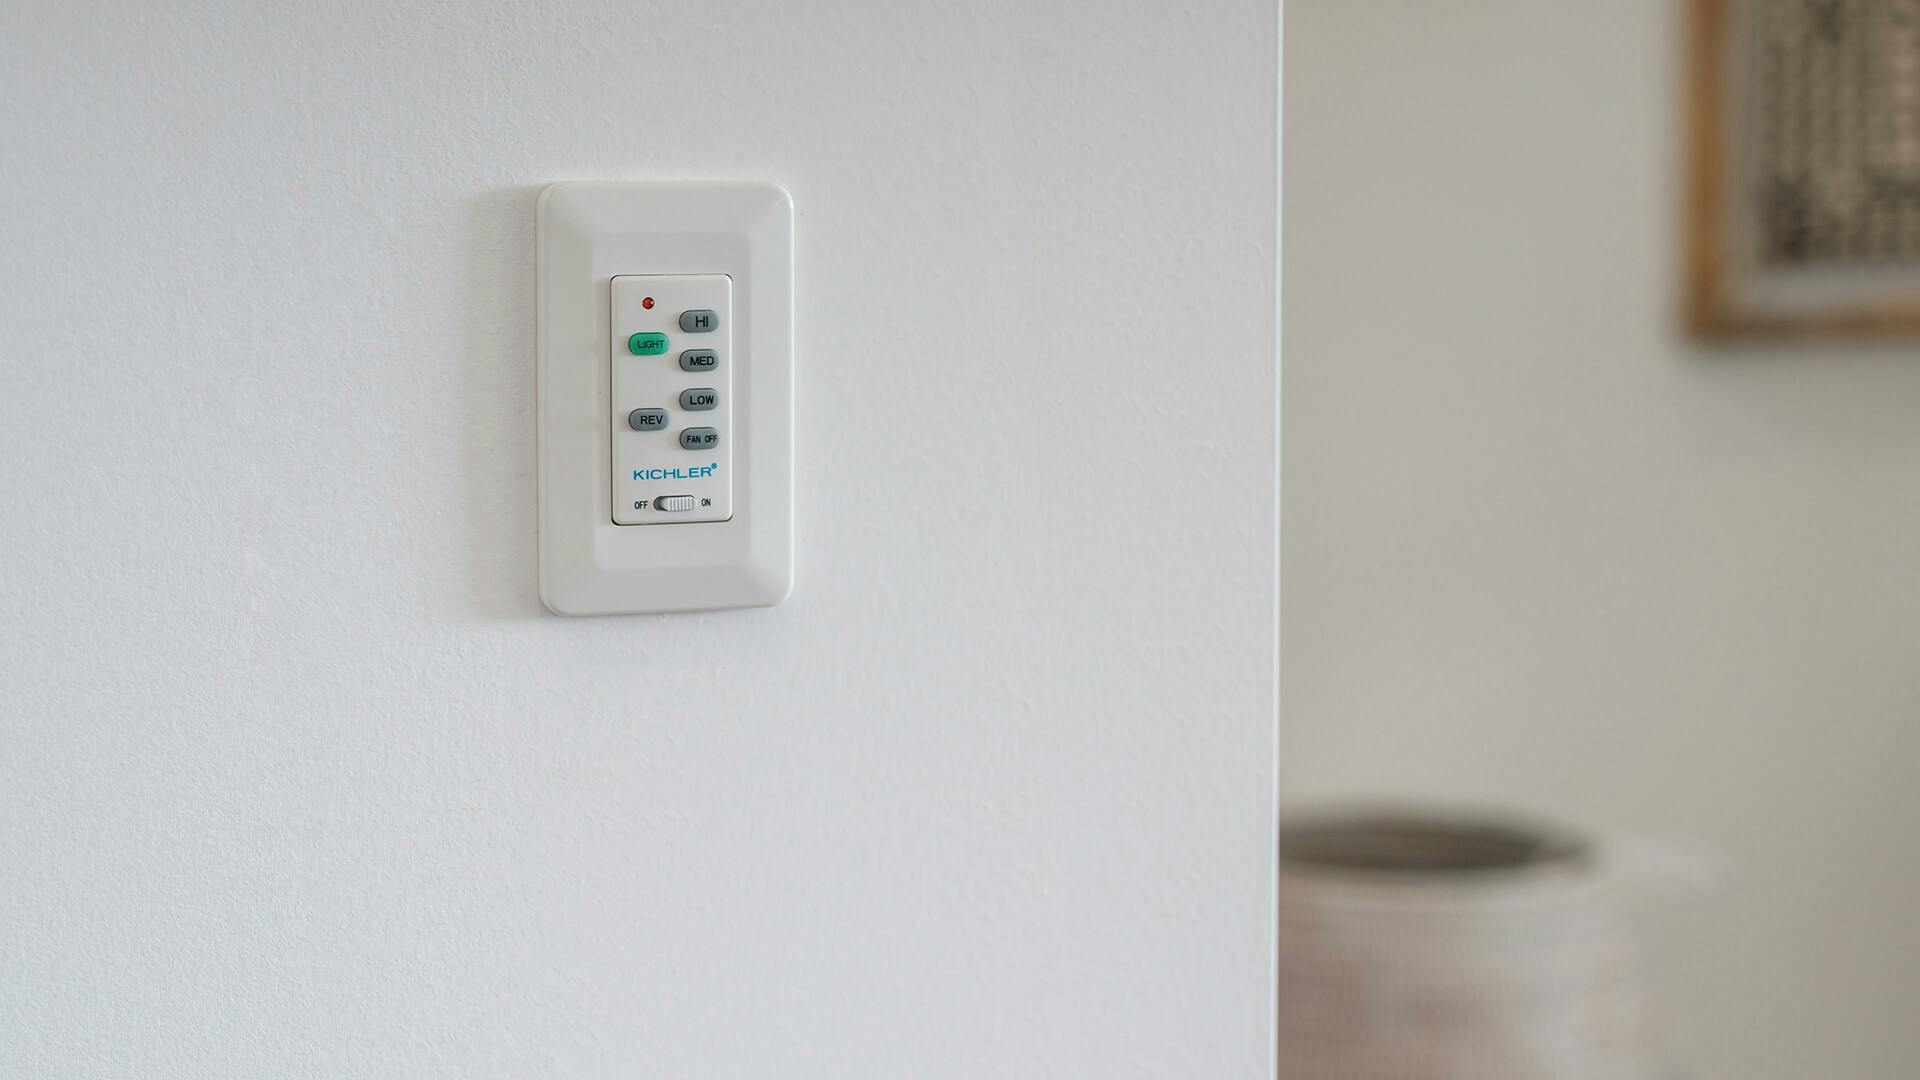 Fan and light control panel on a white wall